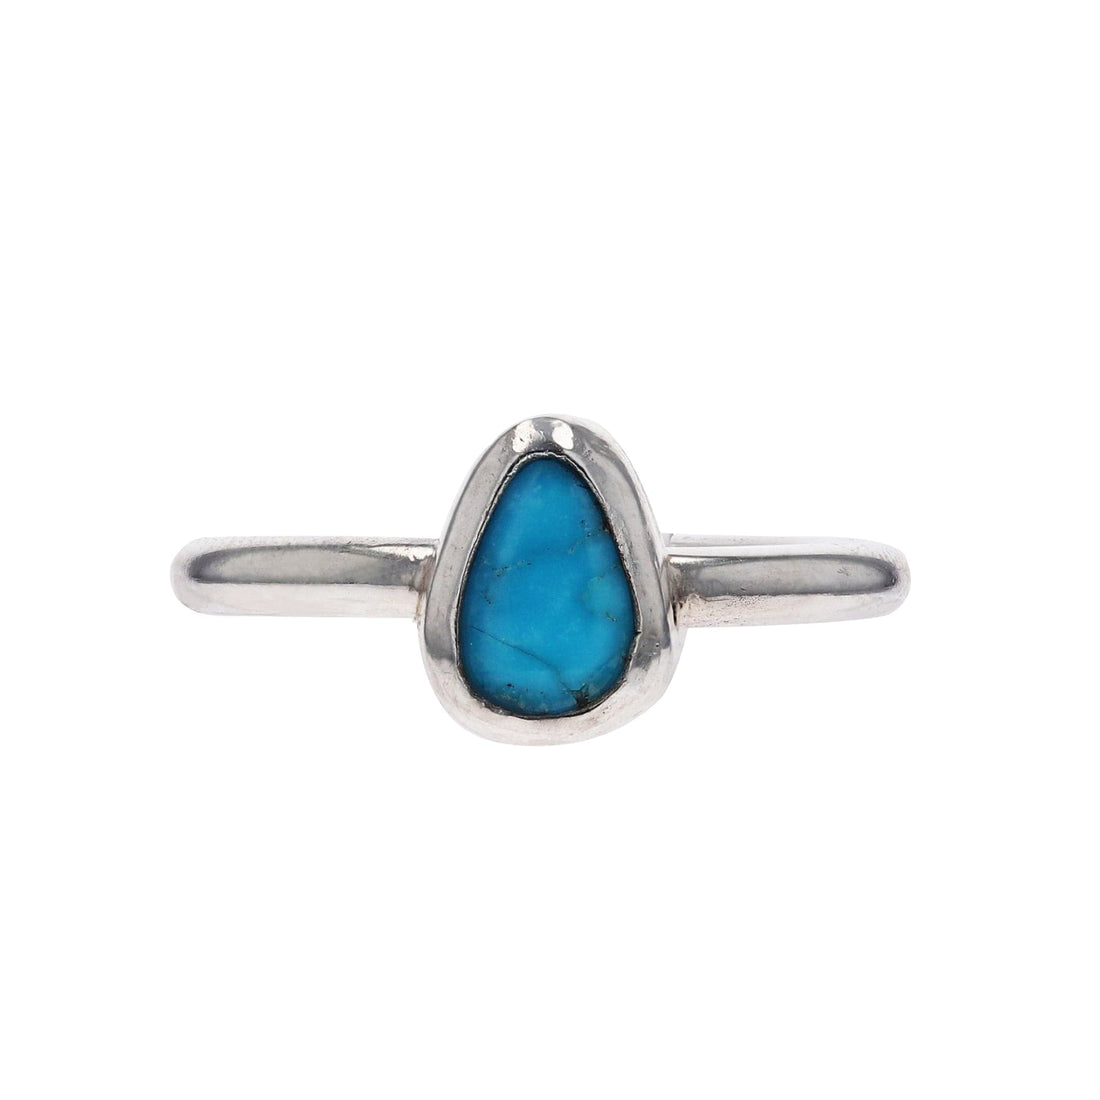 Sterling Silver Pear Turquoise Ring by Arianna Nicolai - Skeie's Jewelers